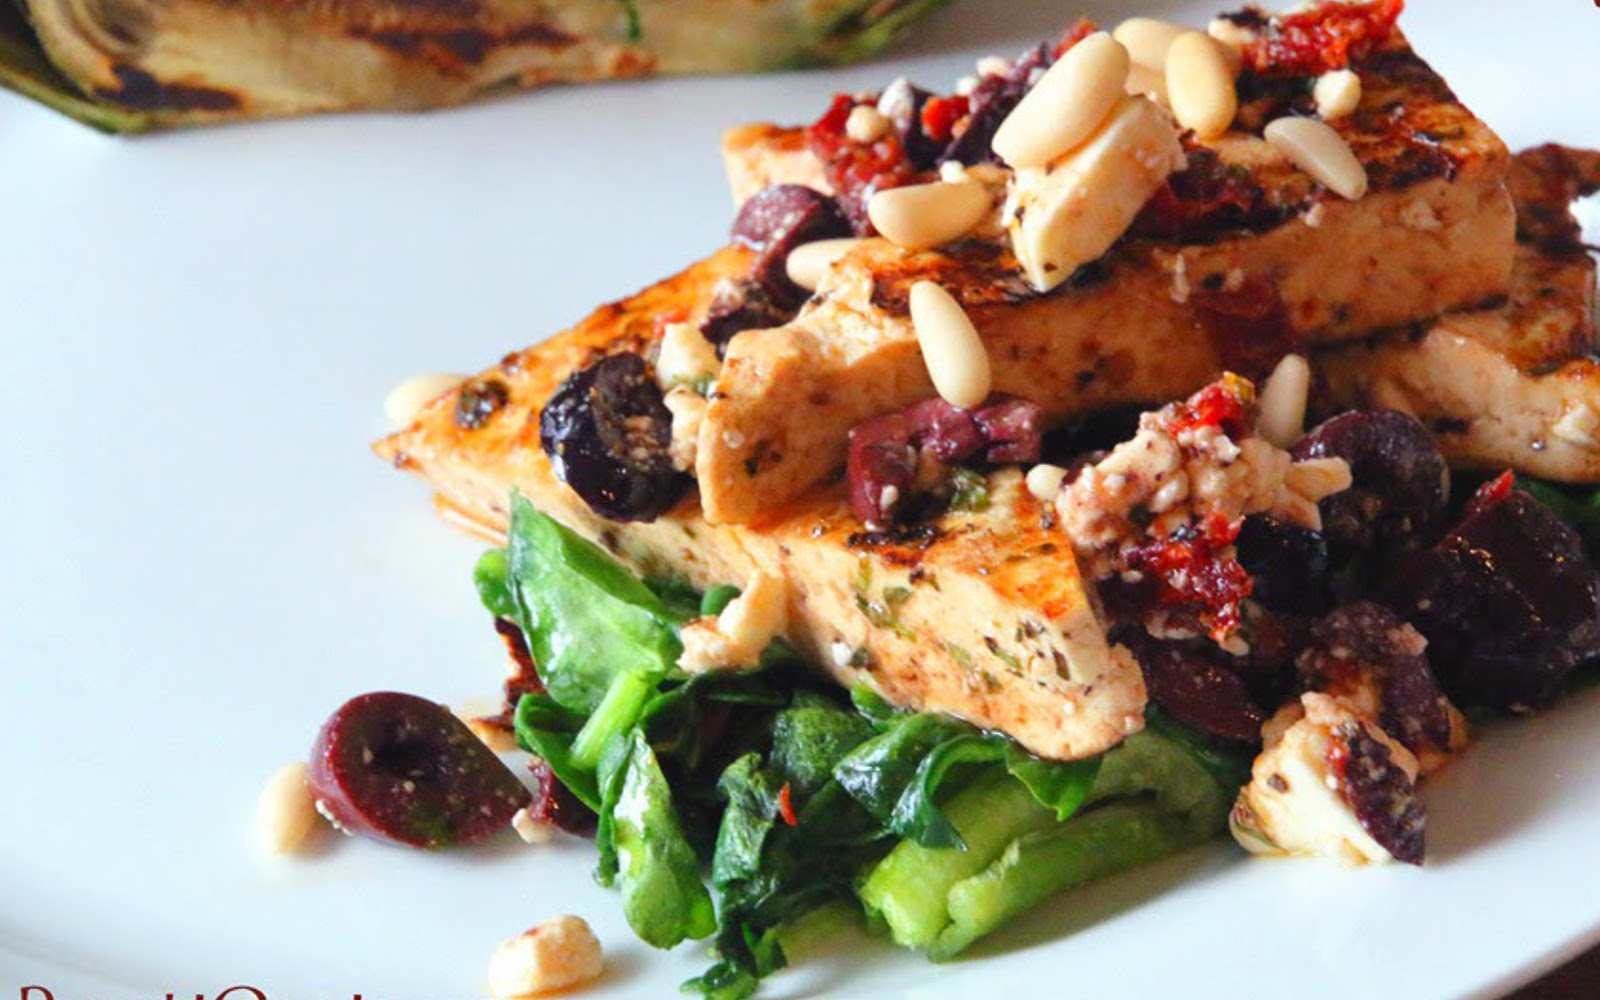 Mediterranean Tofu Steaks [Vegan, Gluten-Free] over bed of spinach with dairy-free feta and pine nut topping